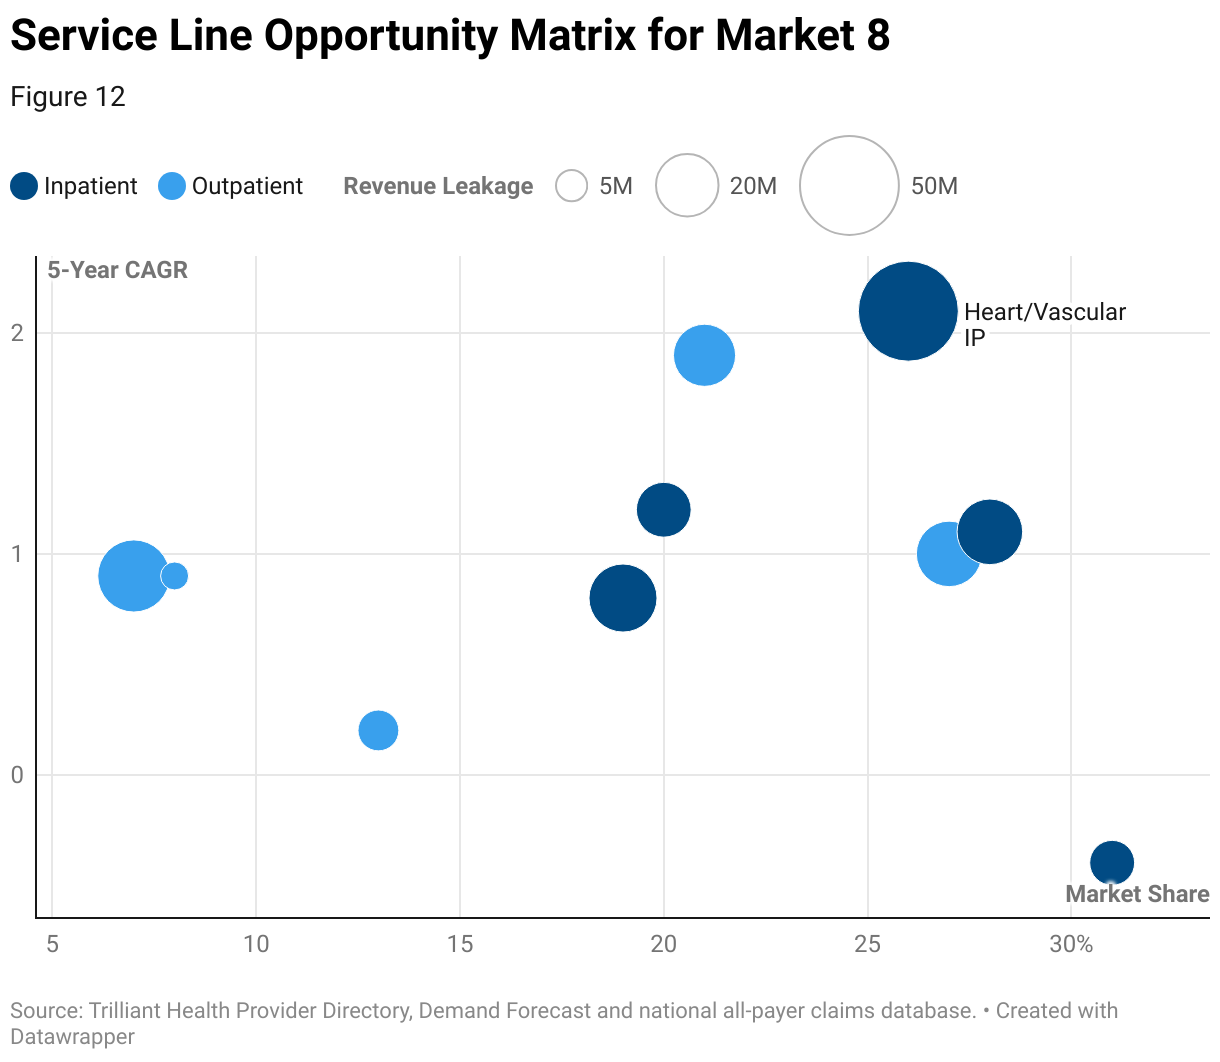 A scatterplot shows the high-volume service lines with high physician alignment in the health system’s core service area